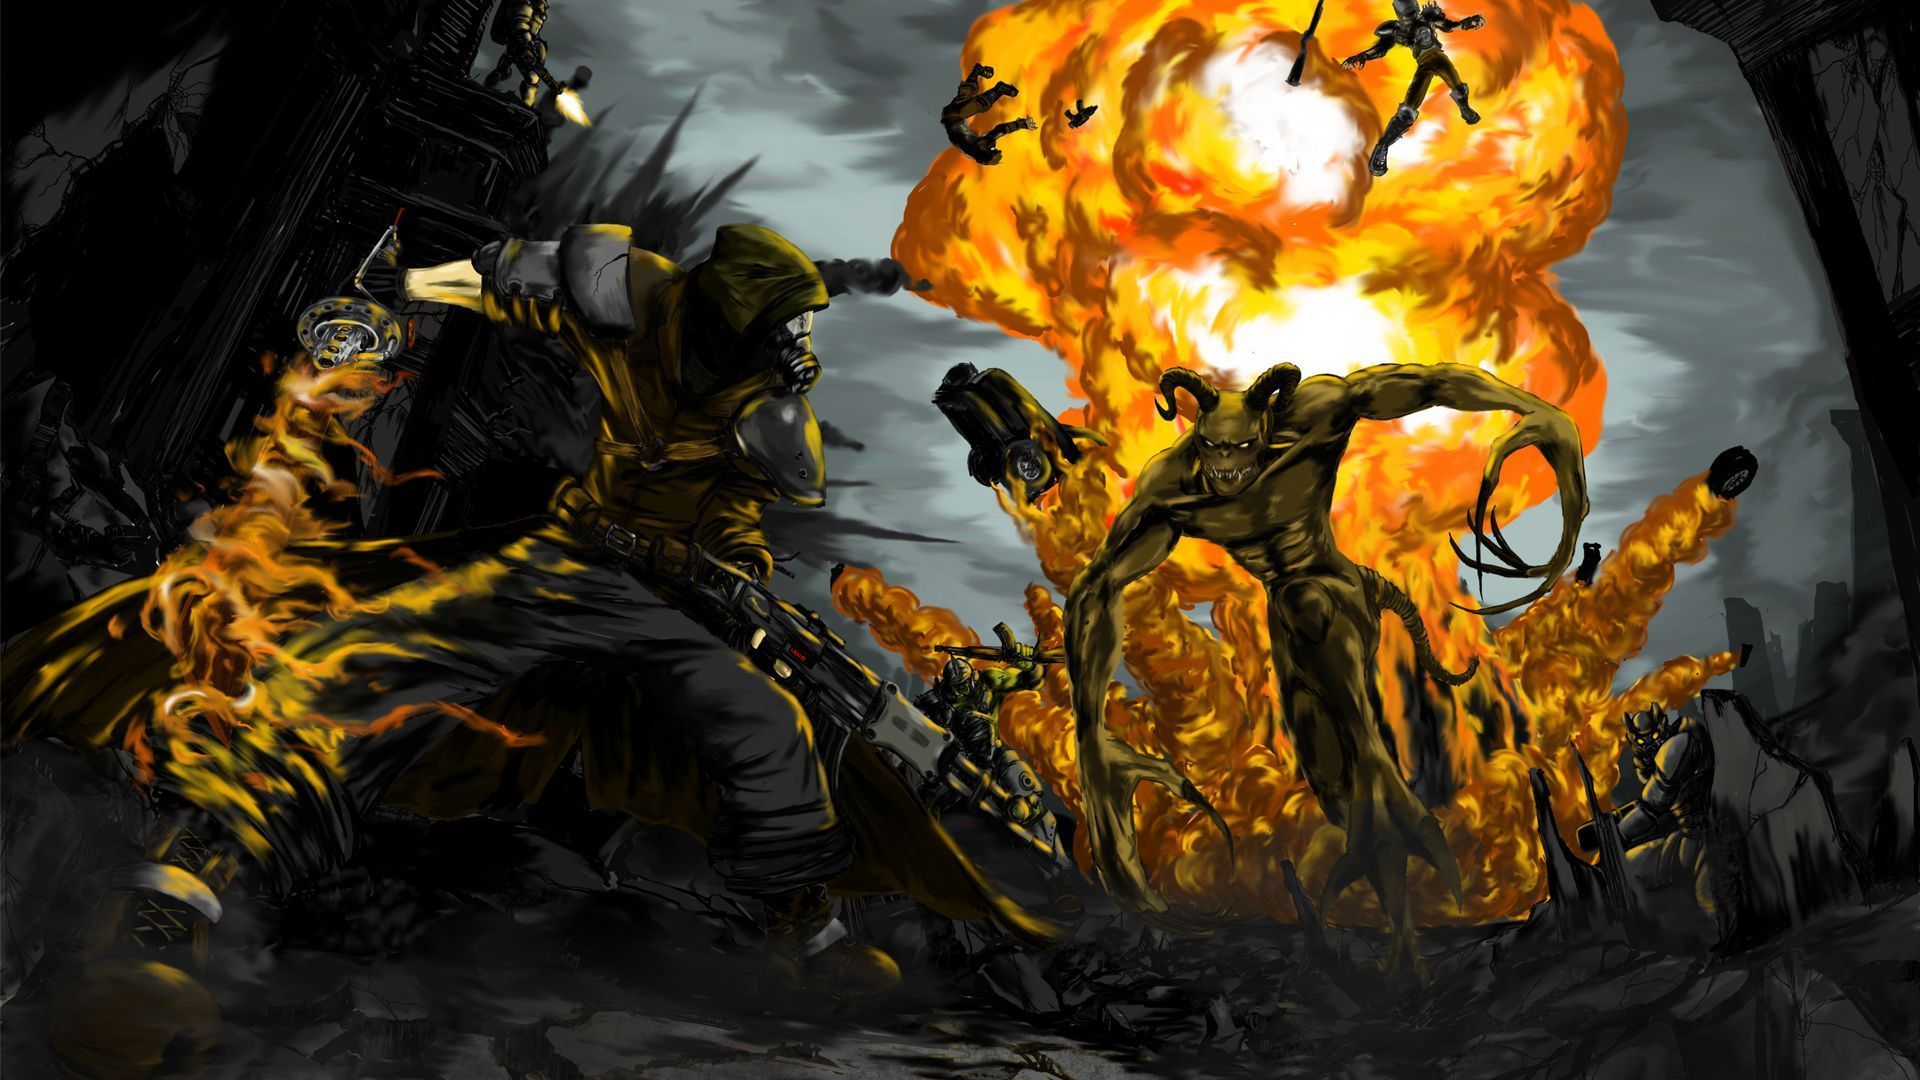 35 Fallout 3 HD Wallpapers Backgrounds - Wallpaper Abyss